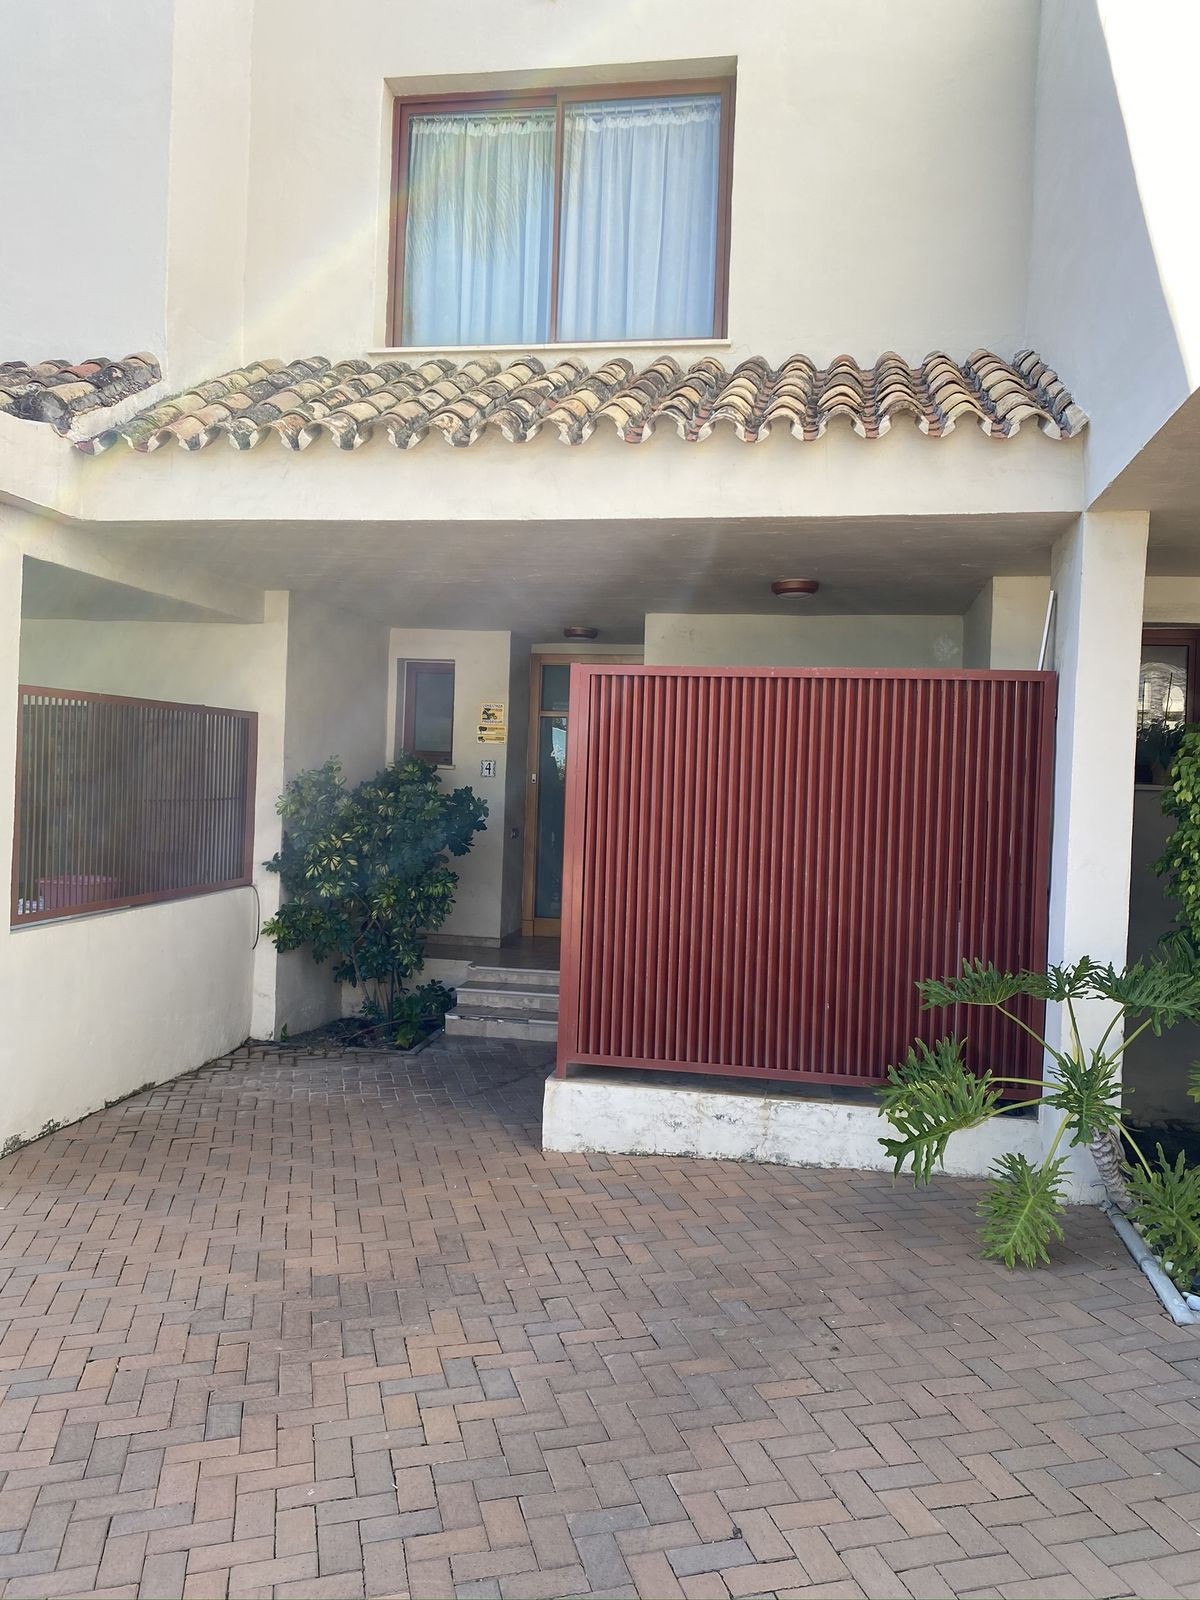 2 Bedroom Semi Detached Townhouse For Sale Cancelada